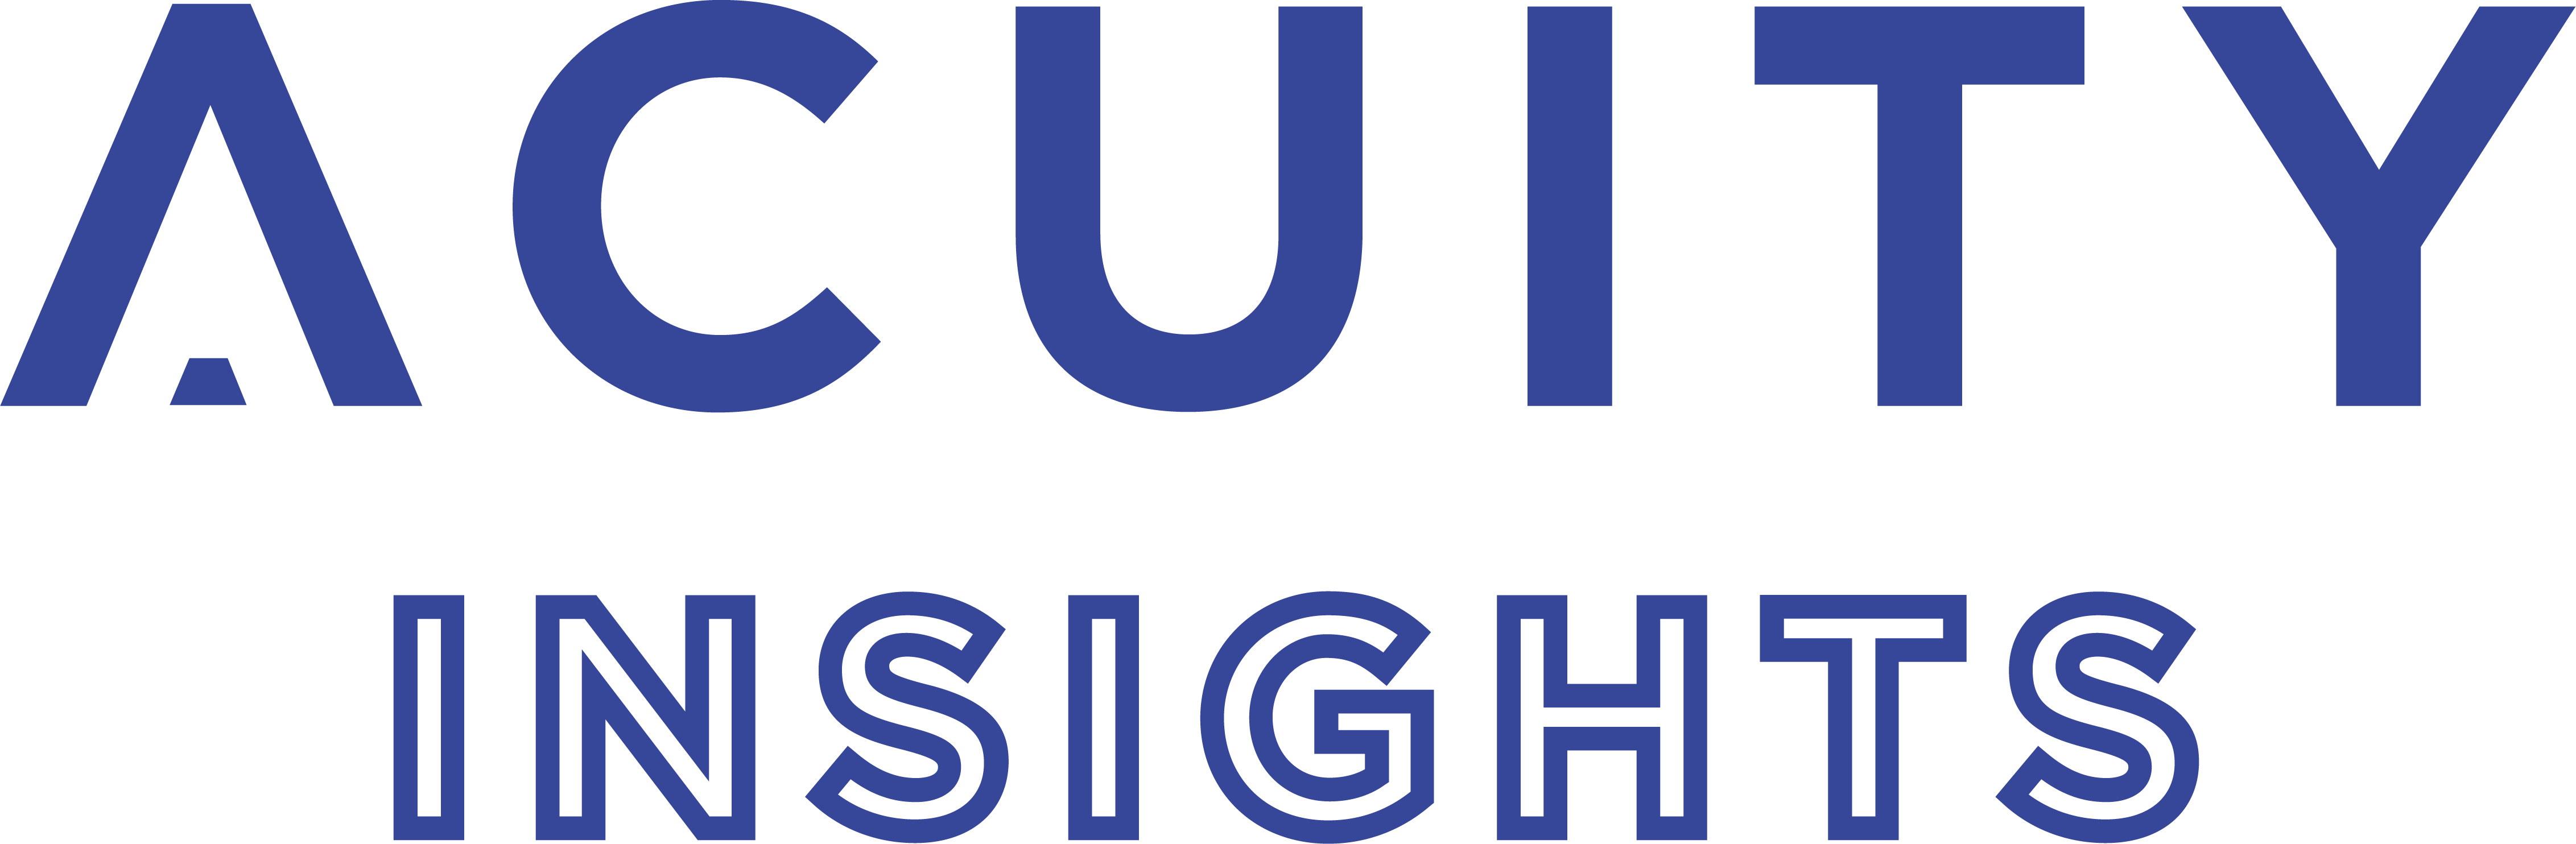 Acuity Insights Vertical